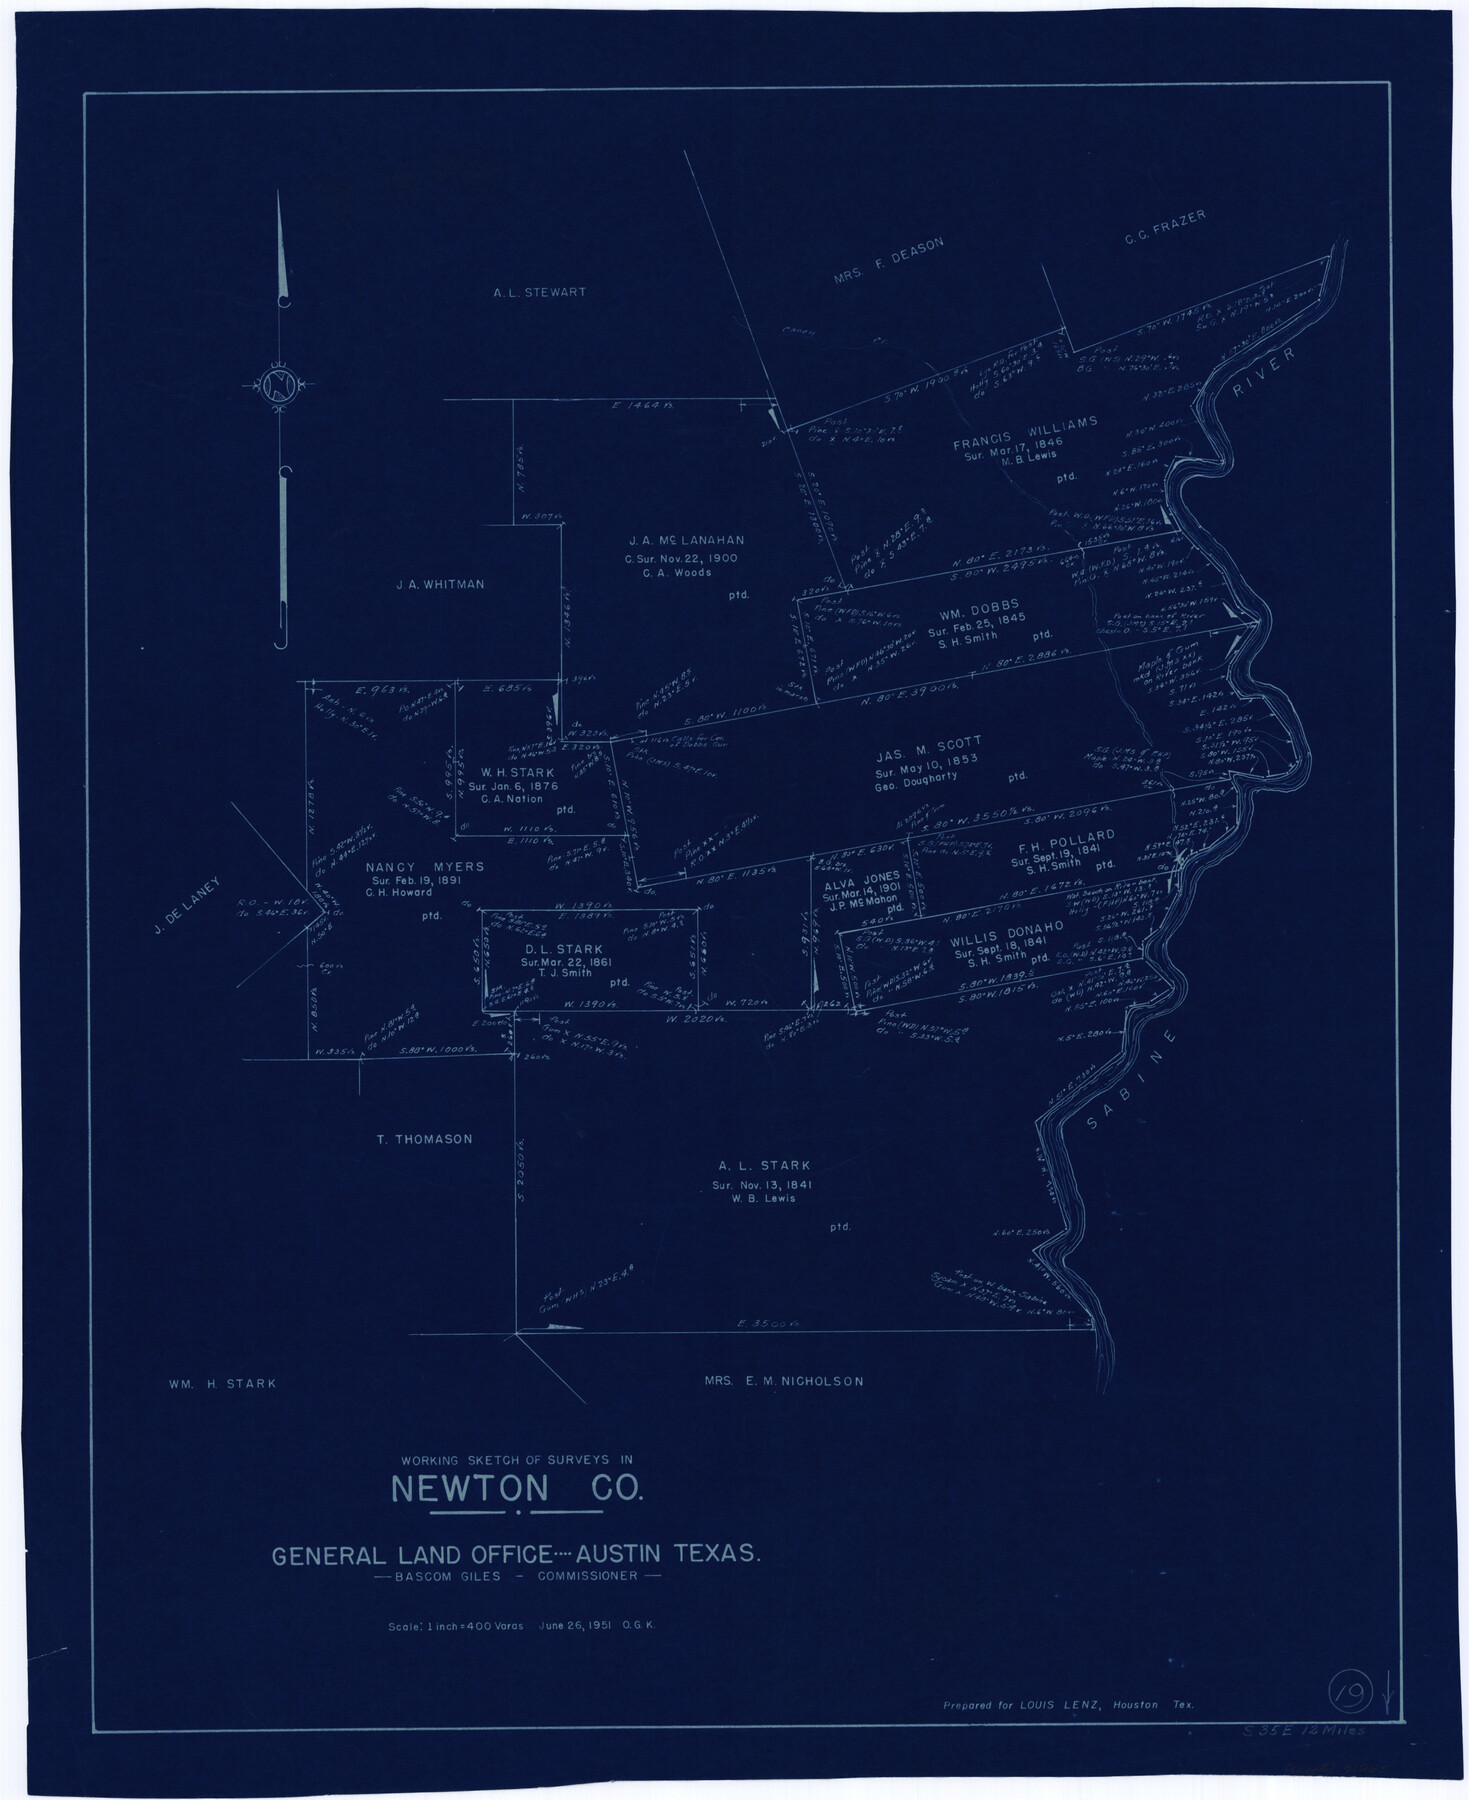 71265, Newton County Working Sketch 19, General Map Collection